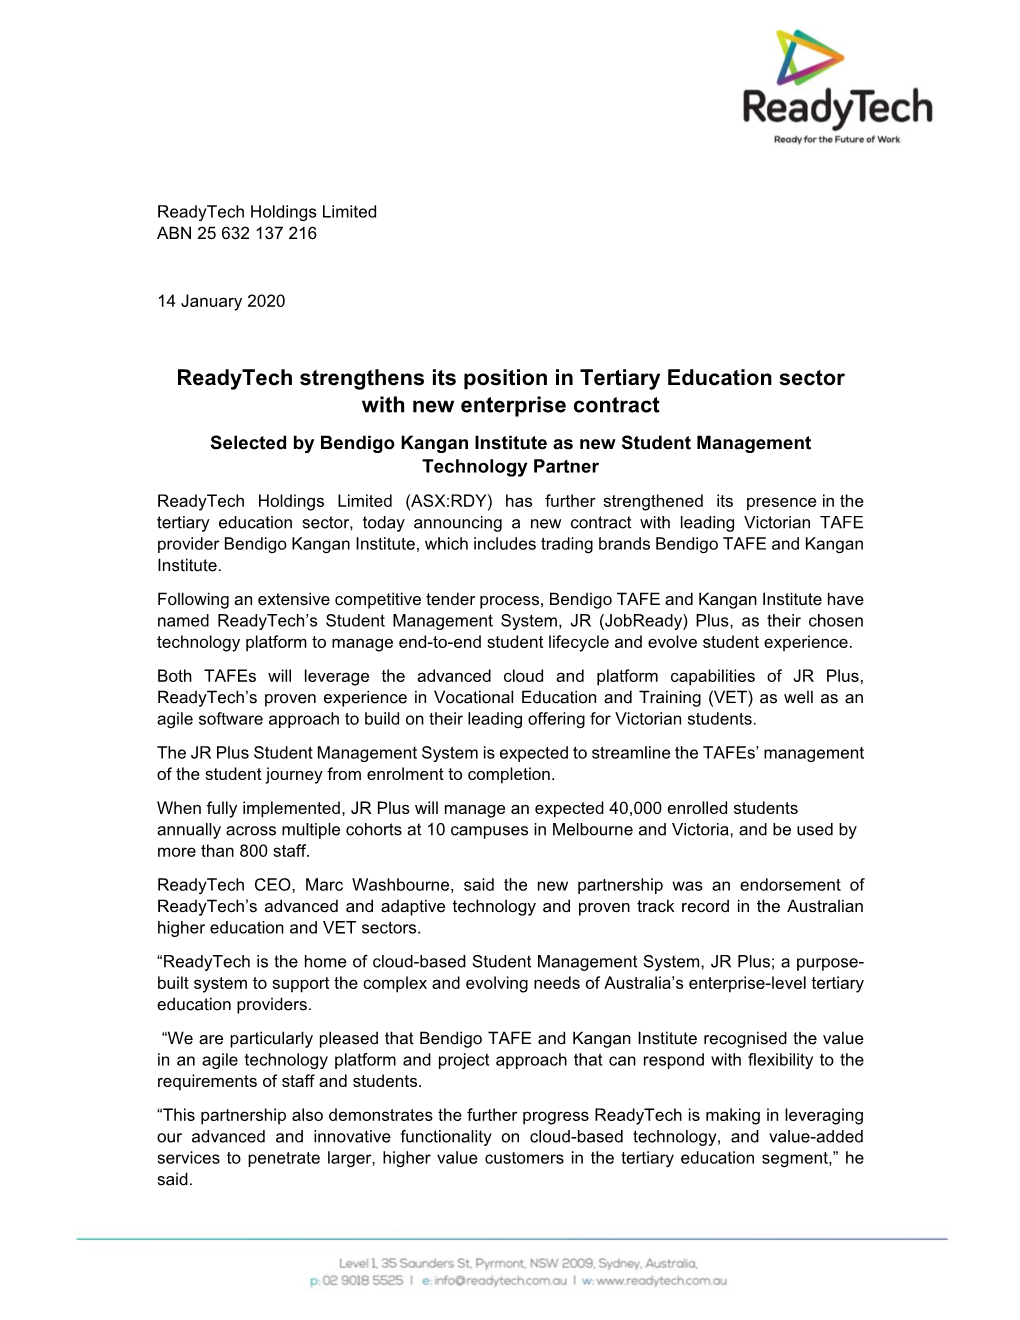 Readytech Strengthens Its Position in Tertiary Education Sector with New